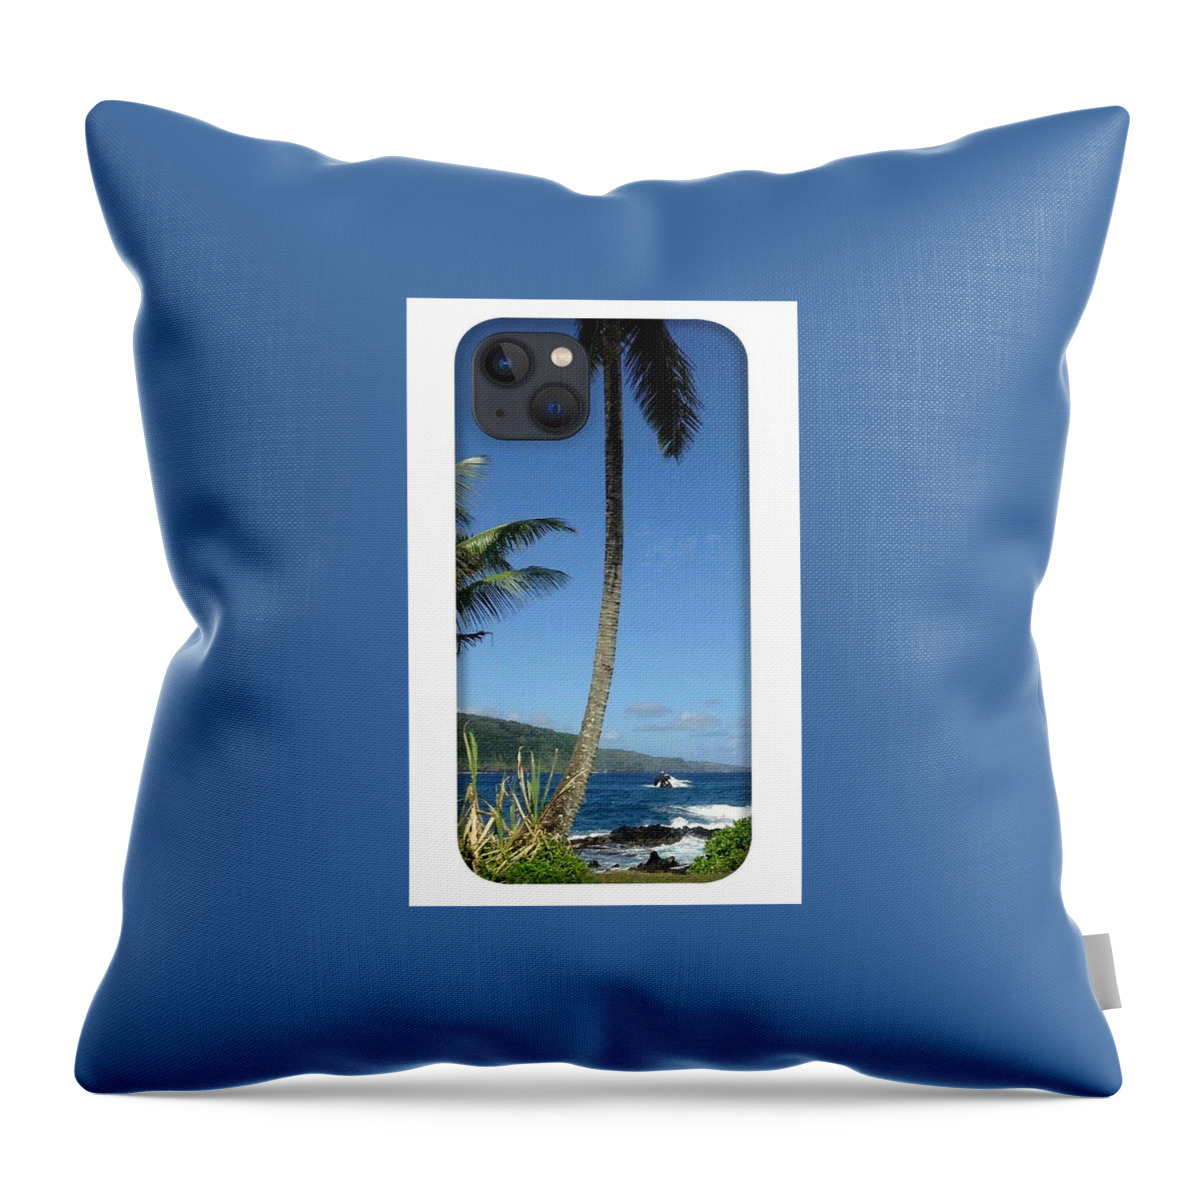  Throw Pillow featuring the photograph Sosobone Originl 5 by Trevor A Smith